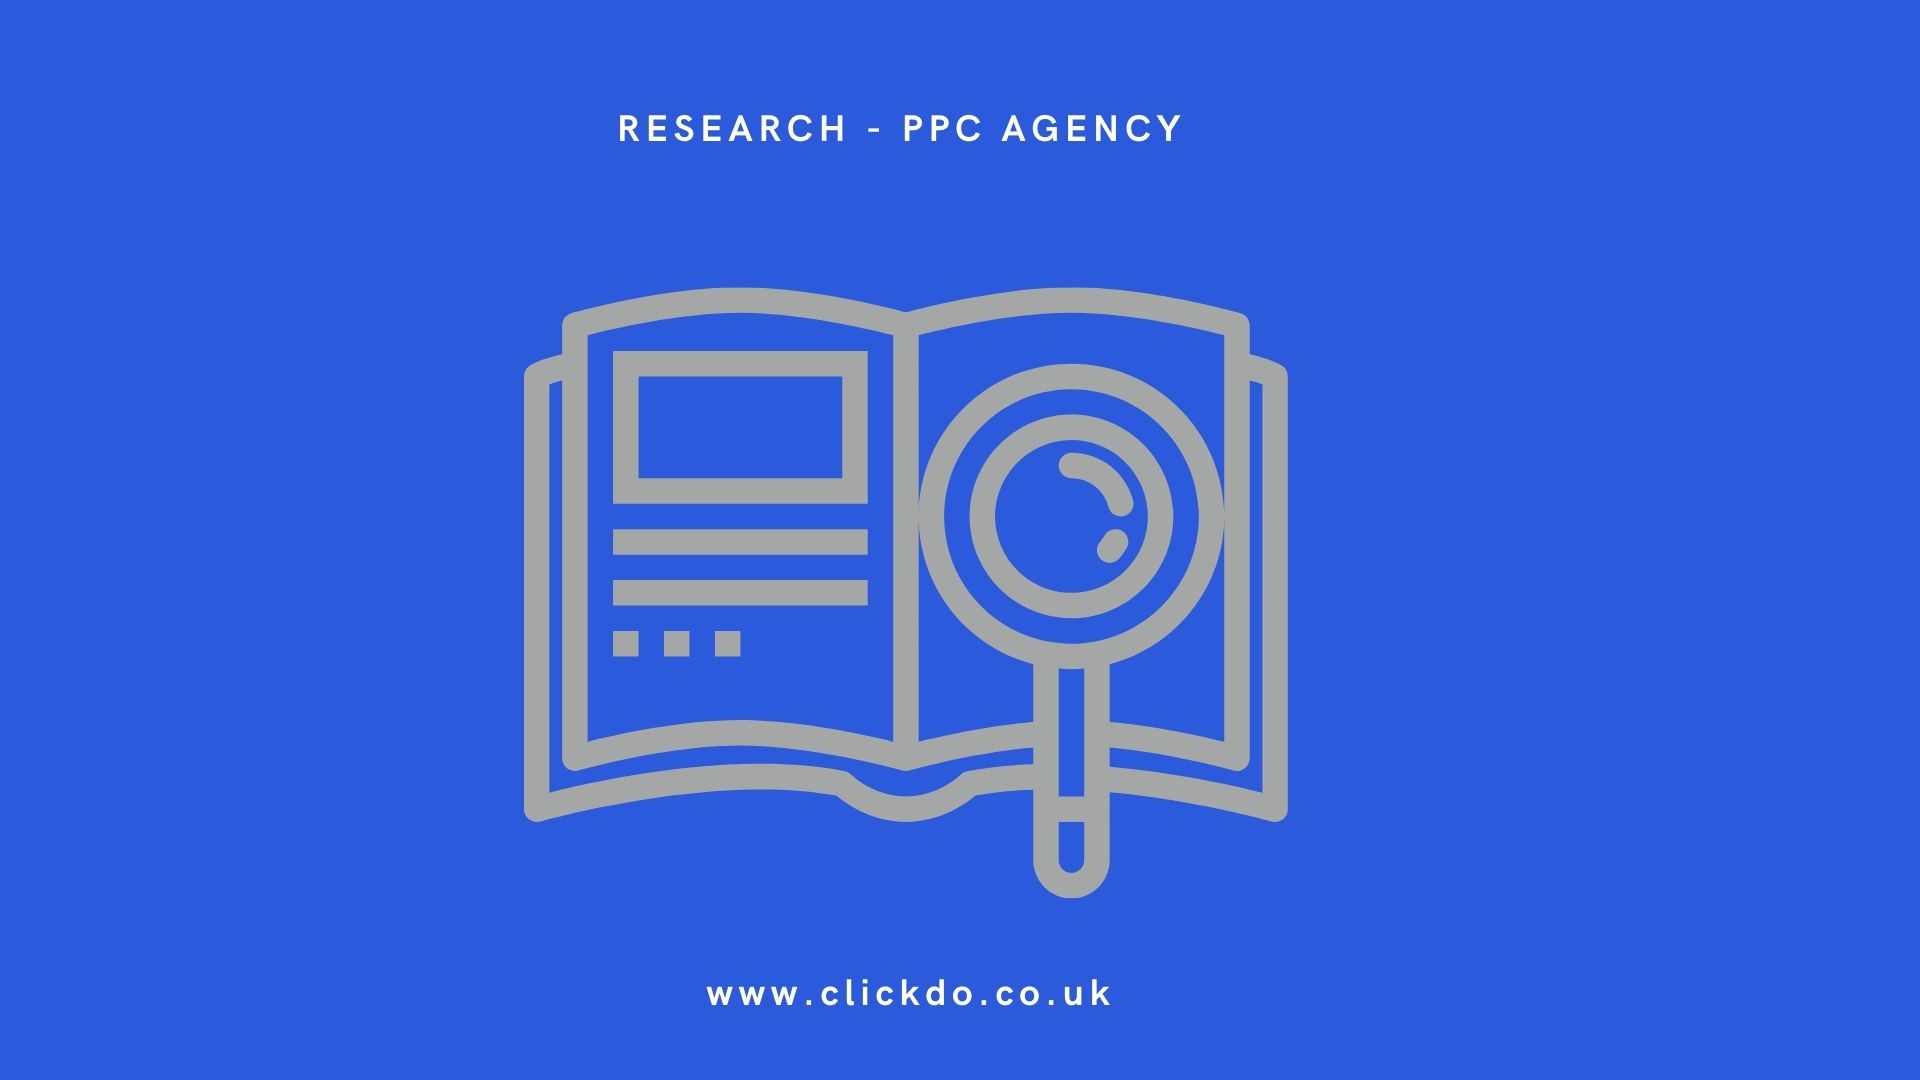 Research - PPC Agency